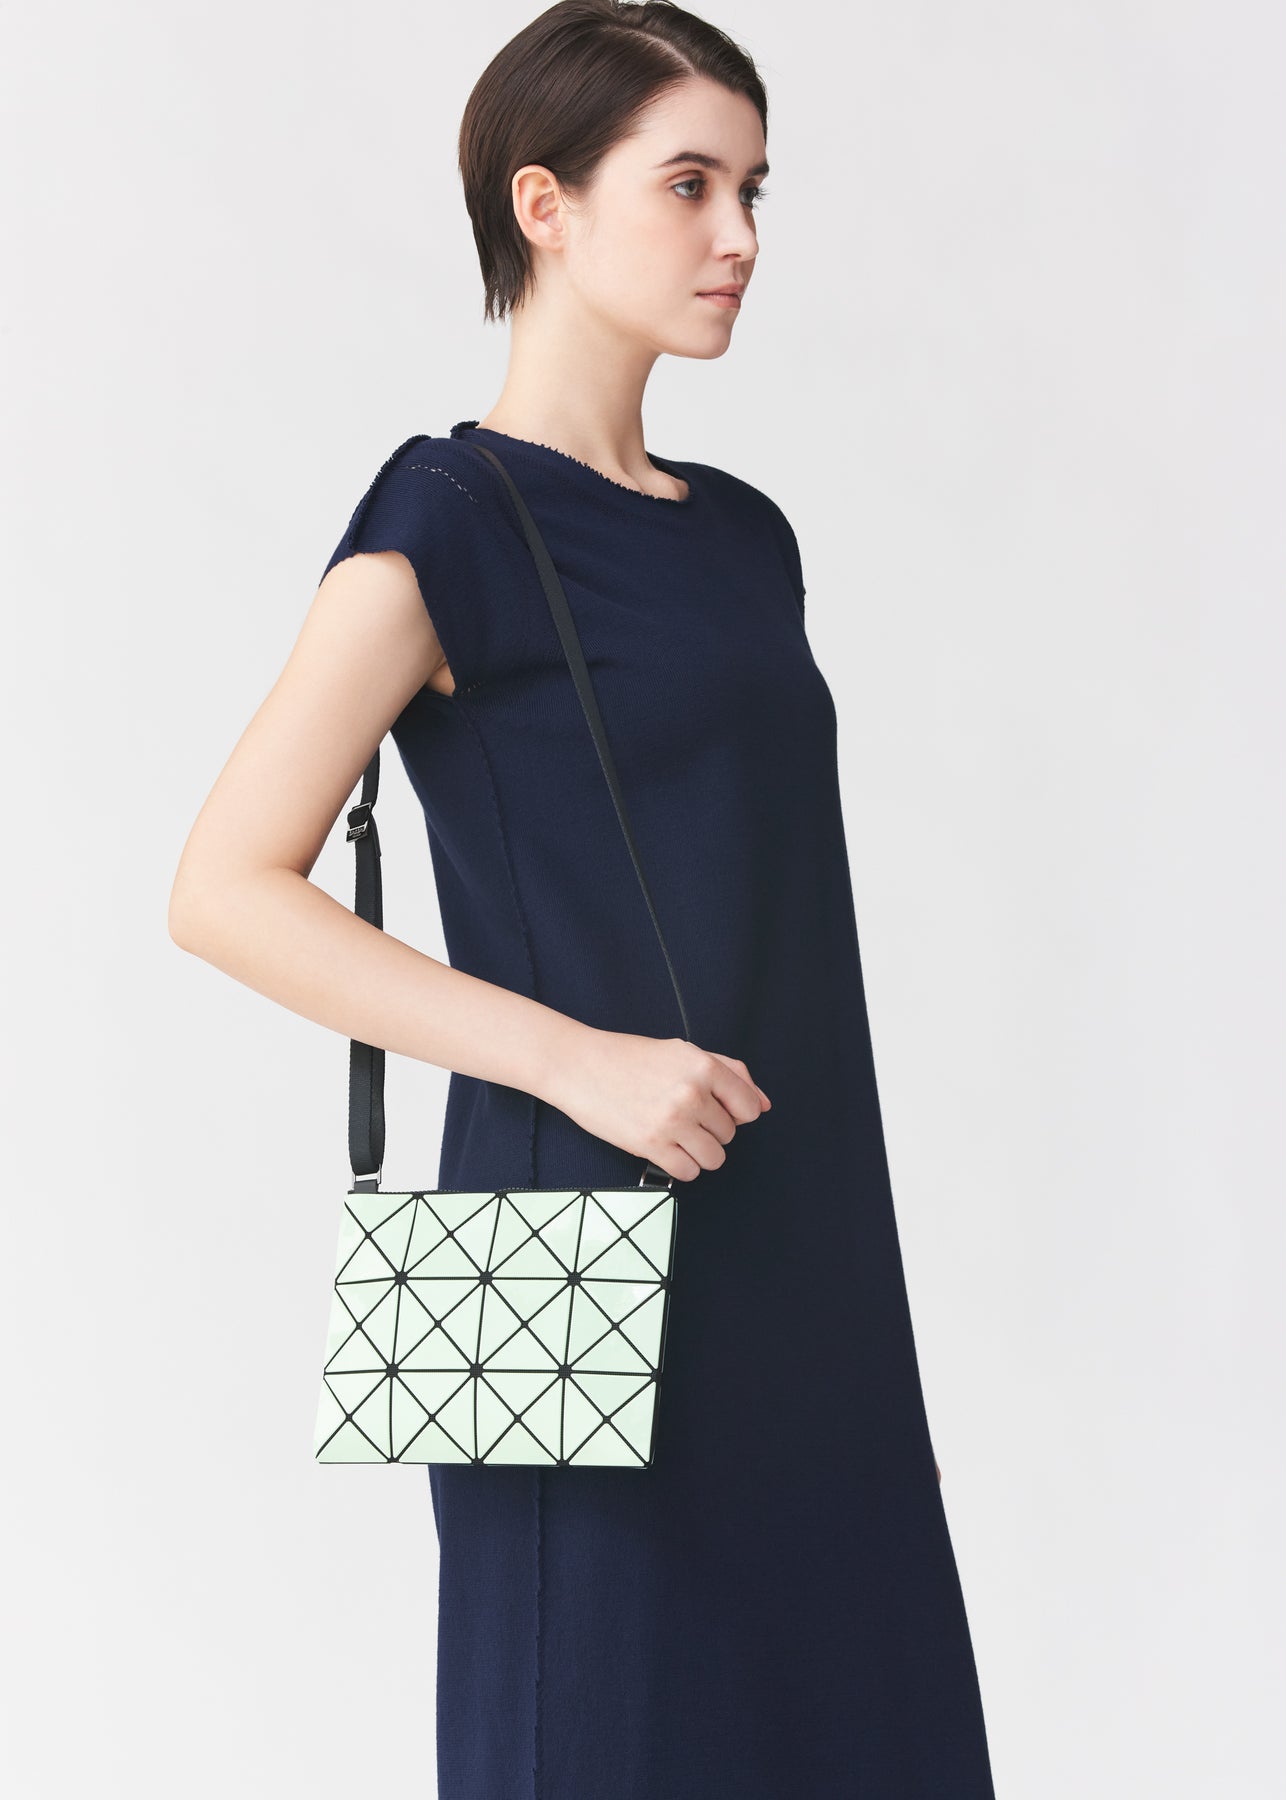 FLAP SHOULDER BAG | The official ISSEY MIYAKE ONLINE STORE | ISSEY MIYAKE  USA